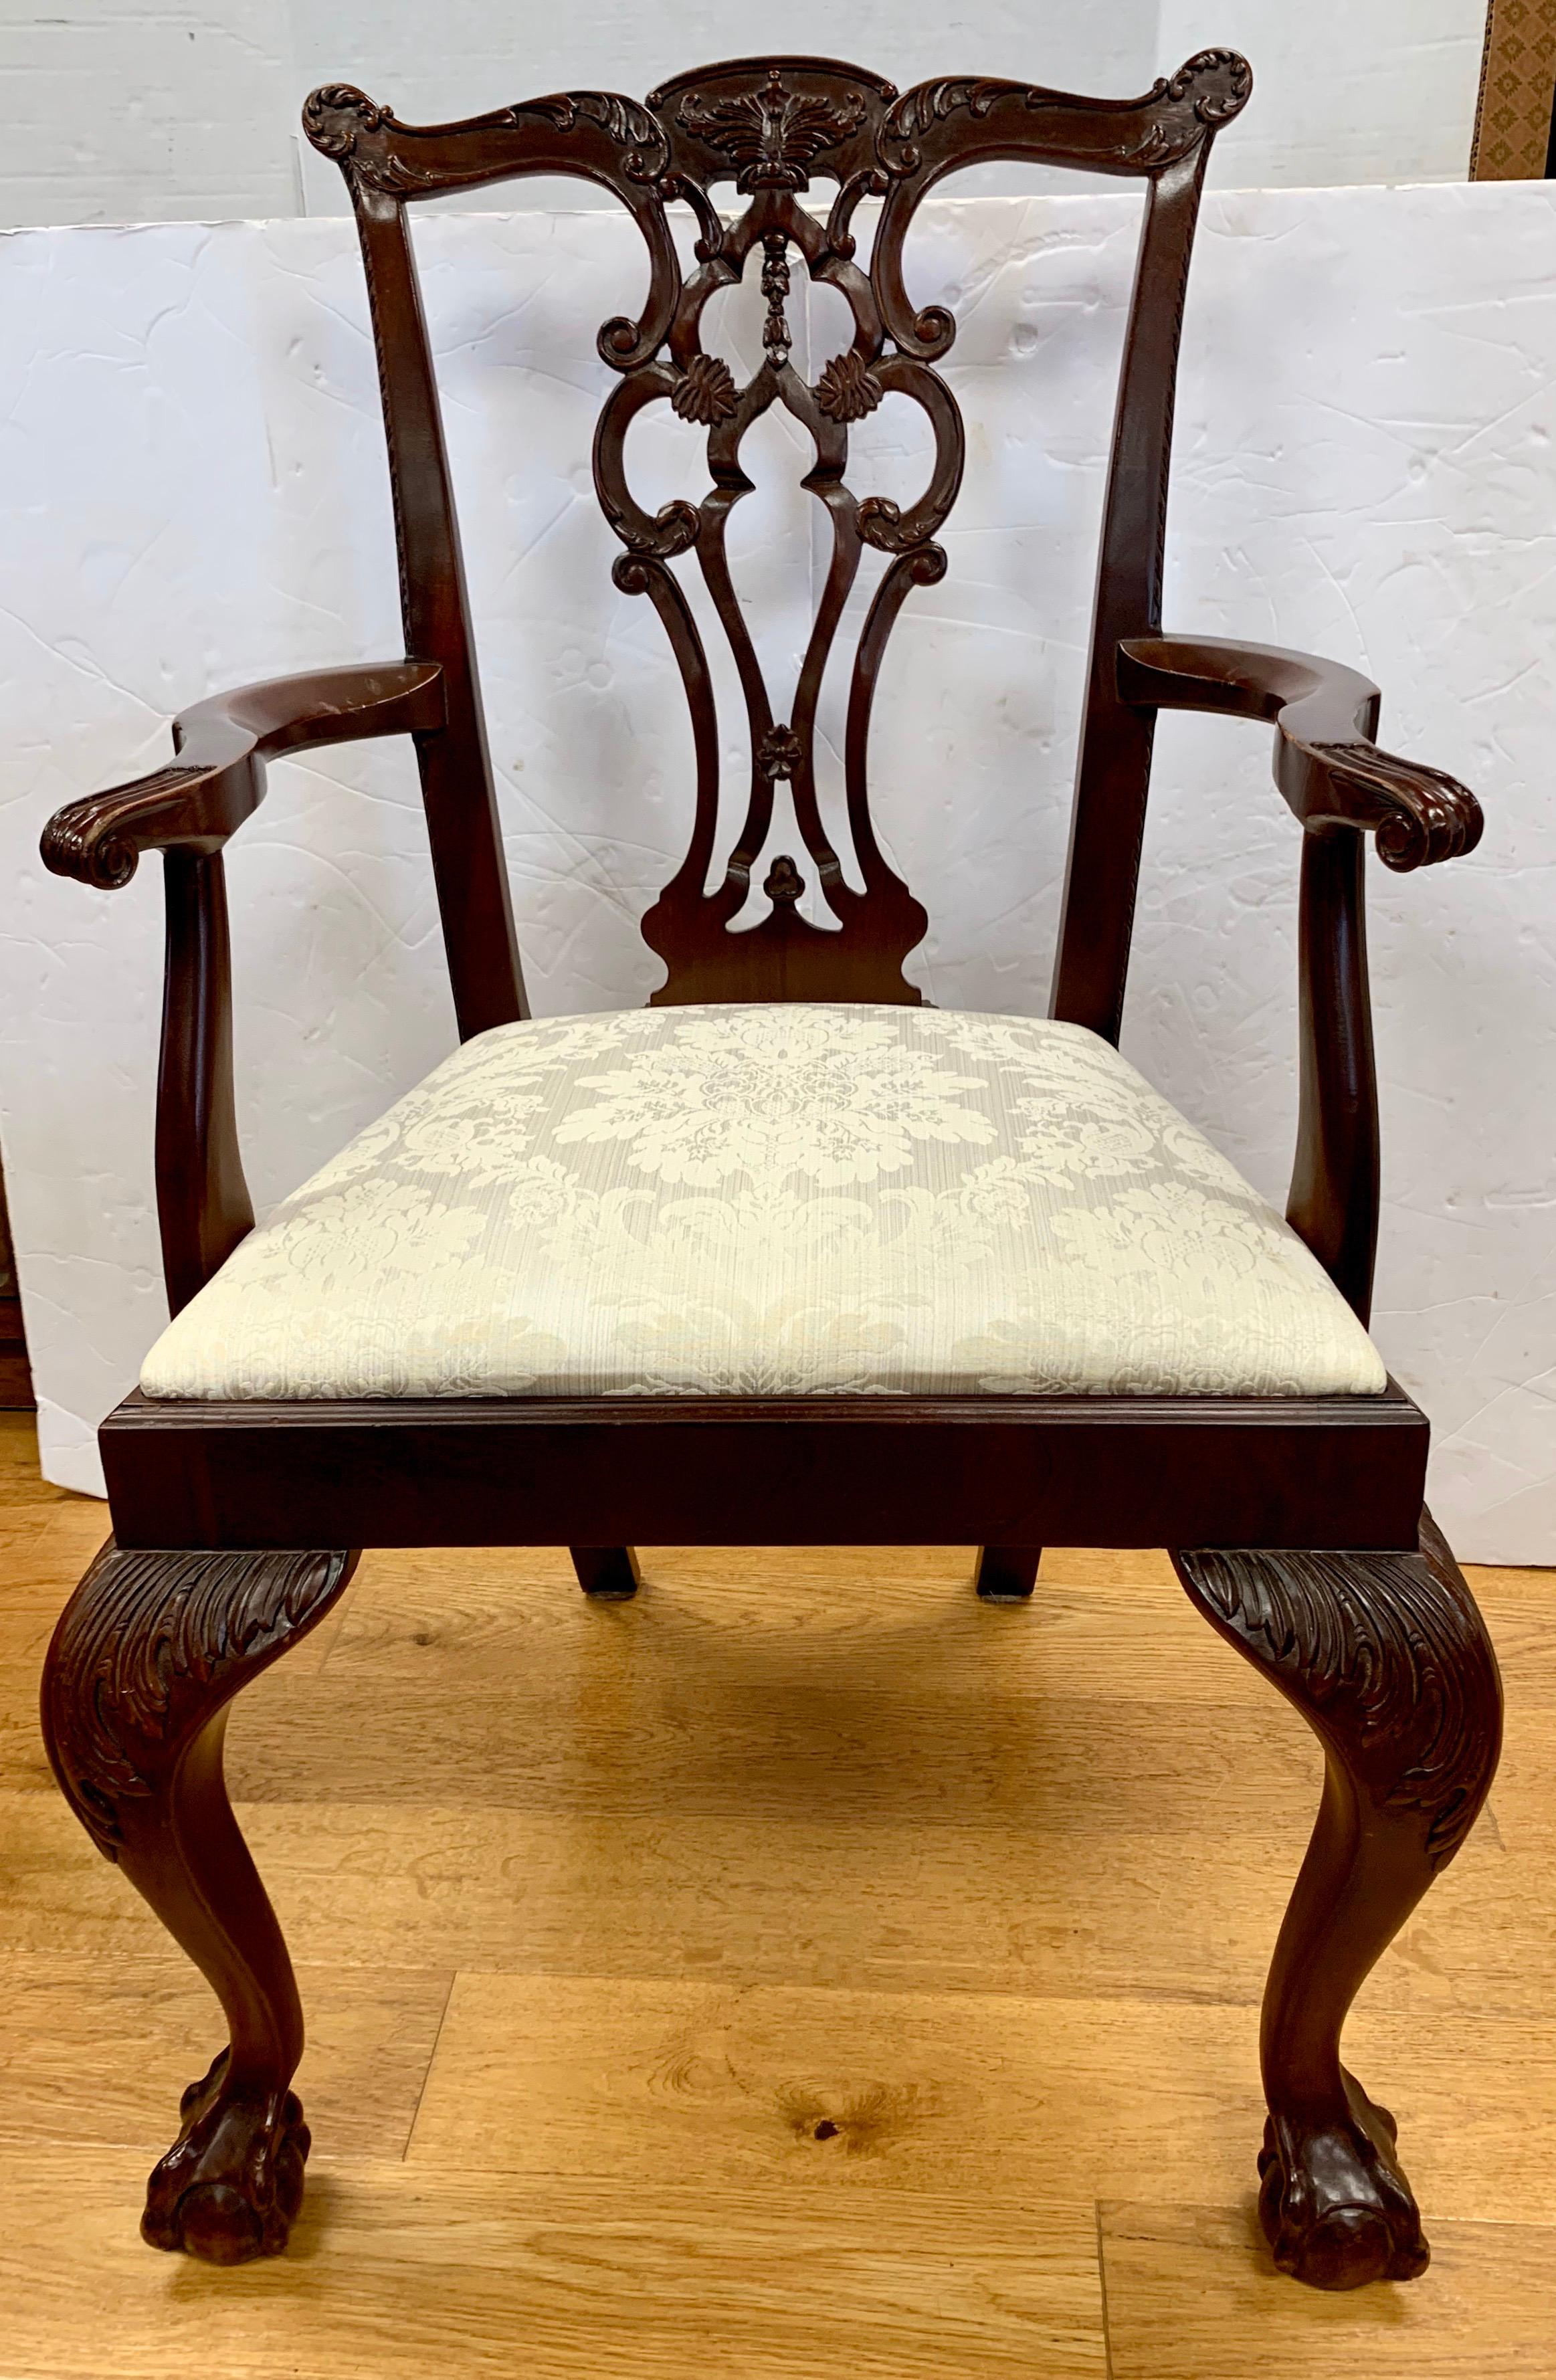 A beautiful vintage set of six solid mahogany Chippendale dining chairs with ornate carvings all around. Consists of four side chairs and two armchairs with ball and claw feet.
They have been crafted from hand carved solid flame mahogany with drop